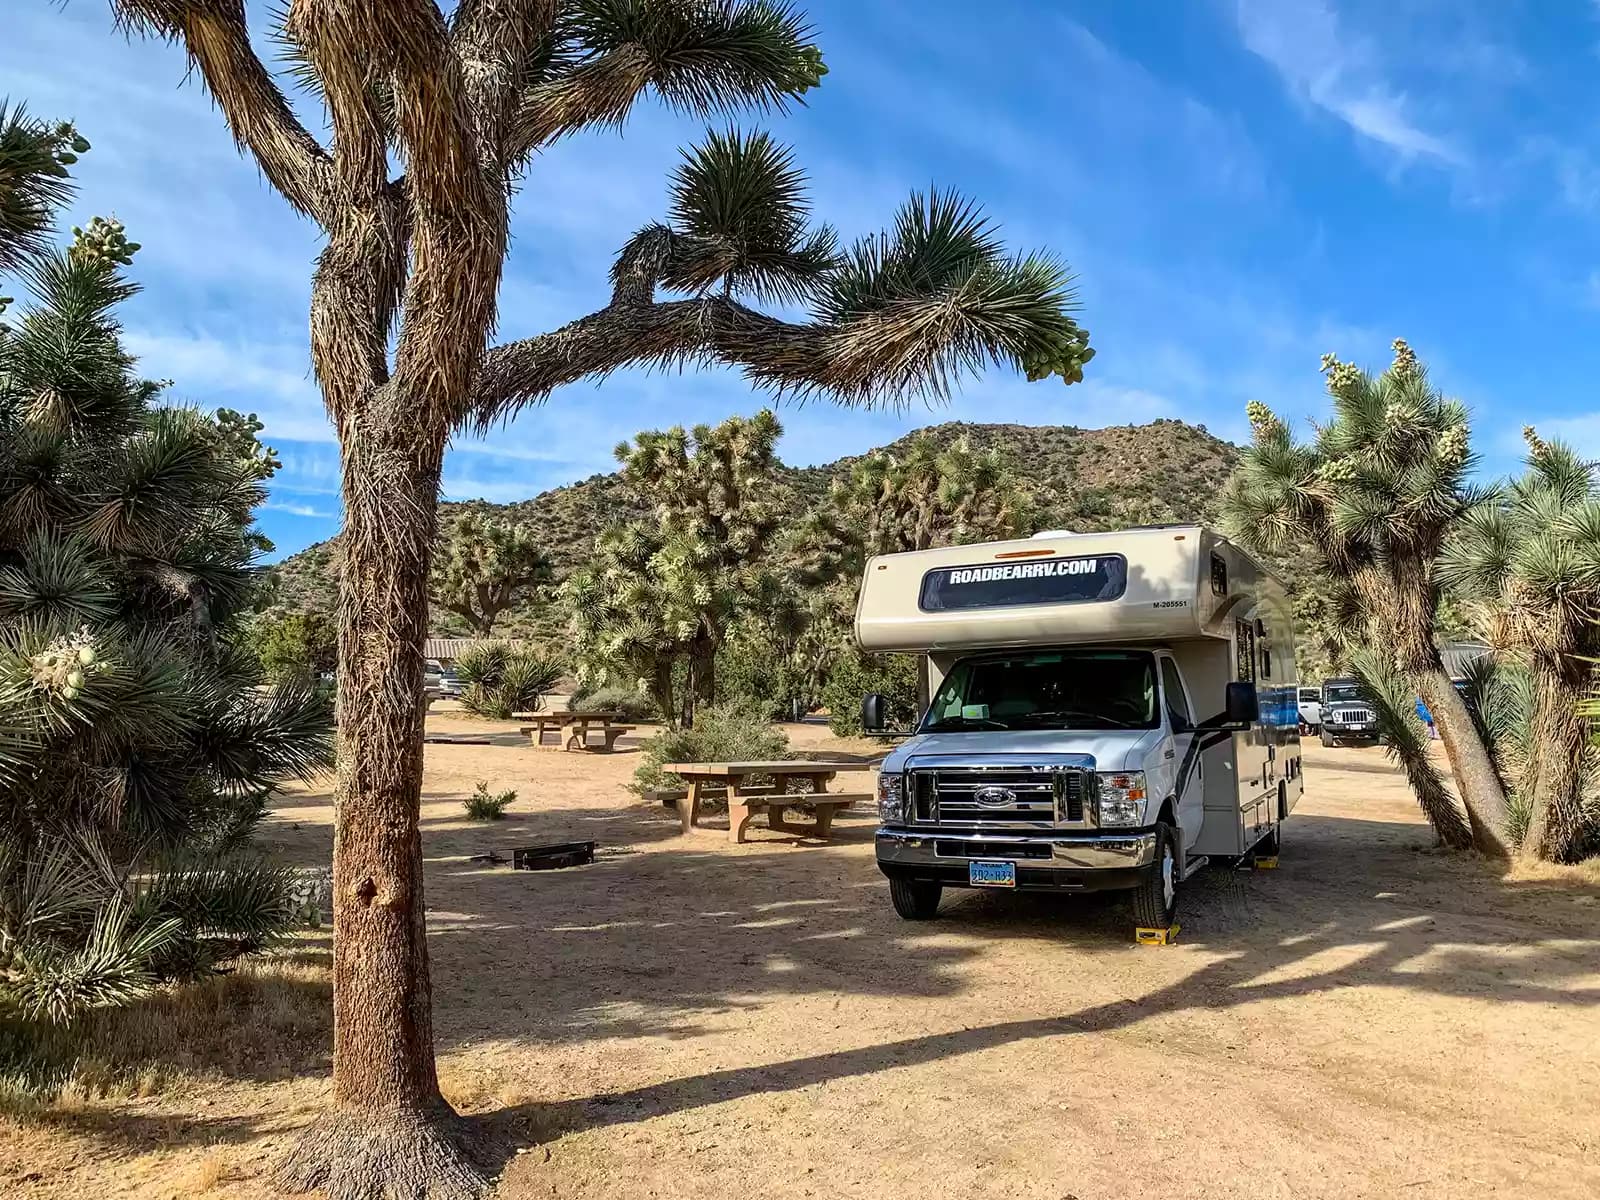 Black and white RV parked in desert campground